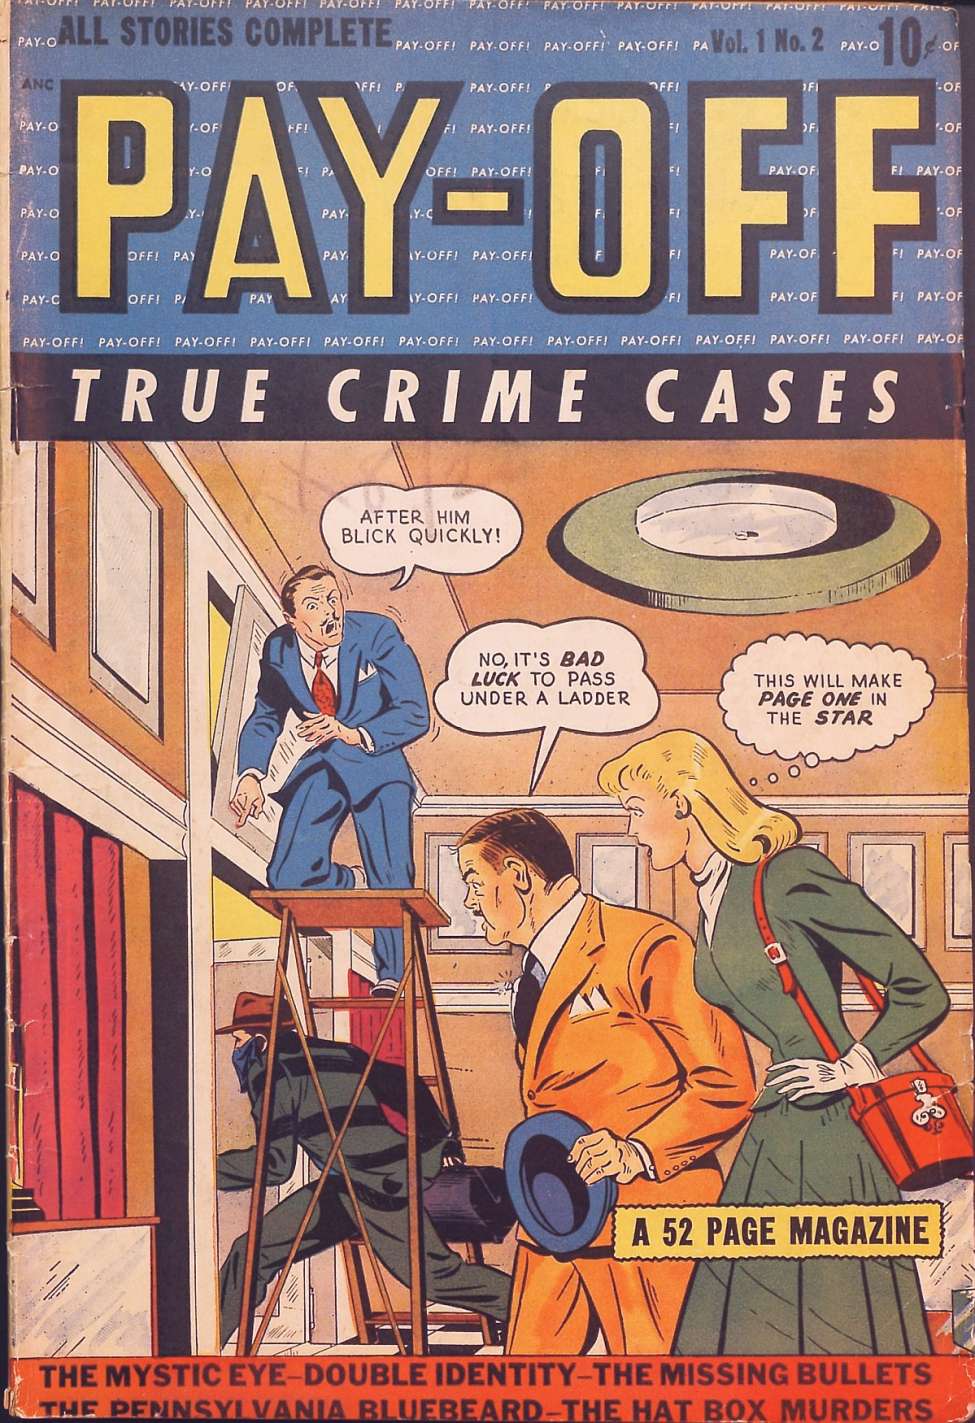 Comic Book Cover For Pay-Off 2